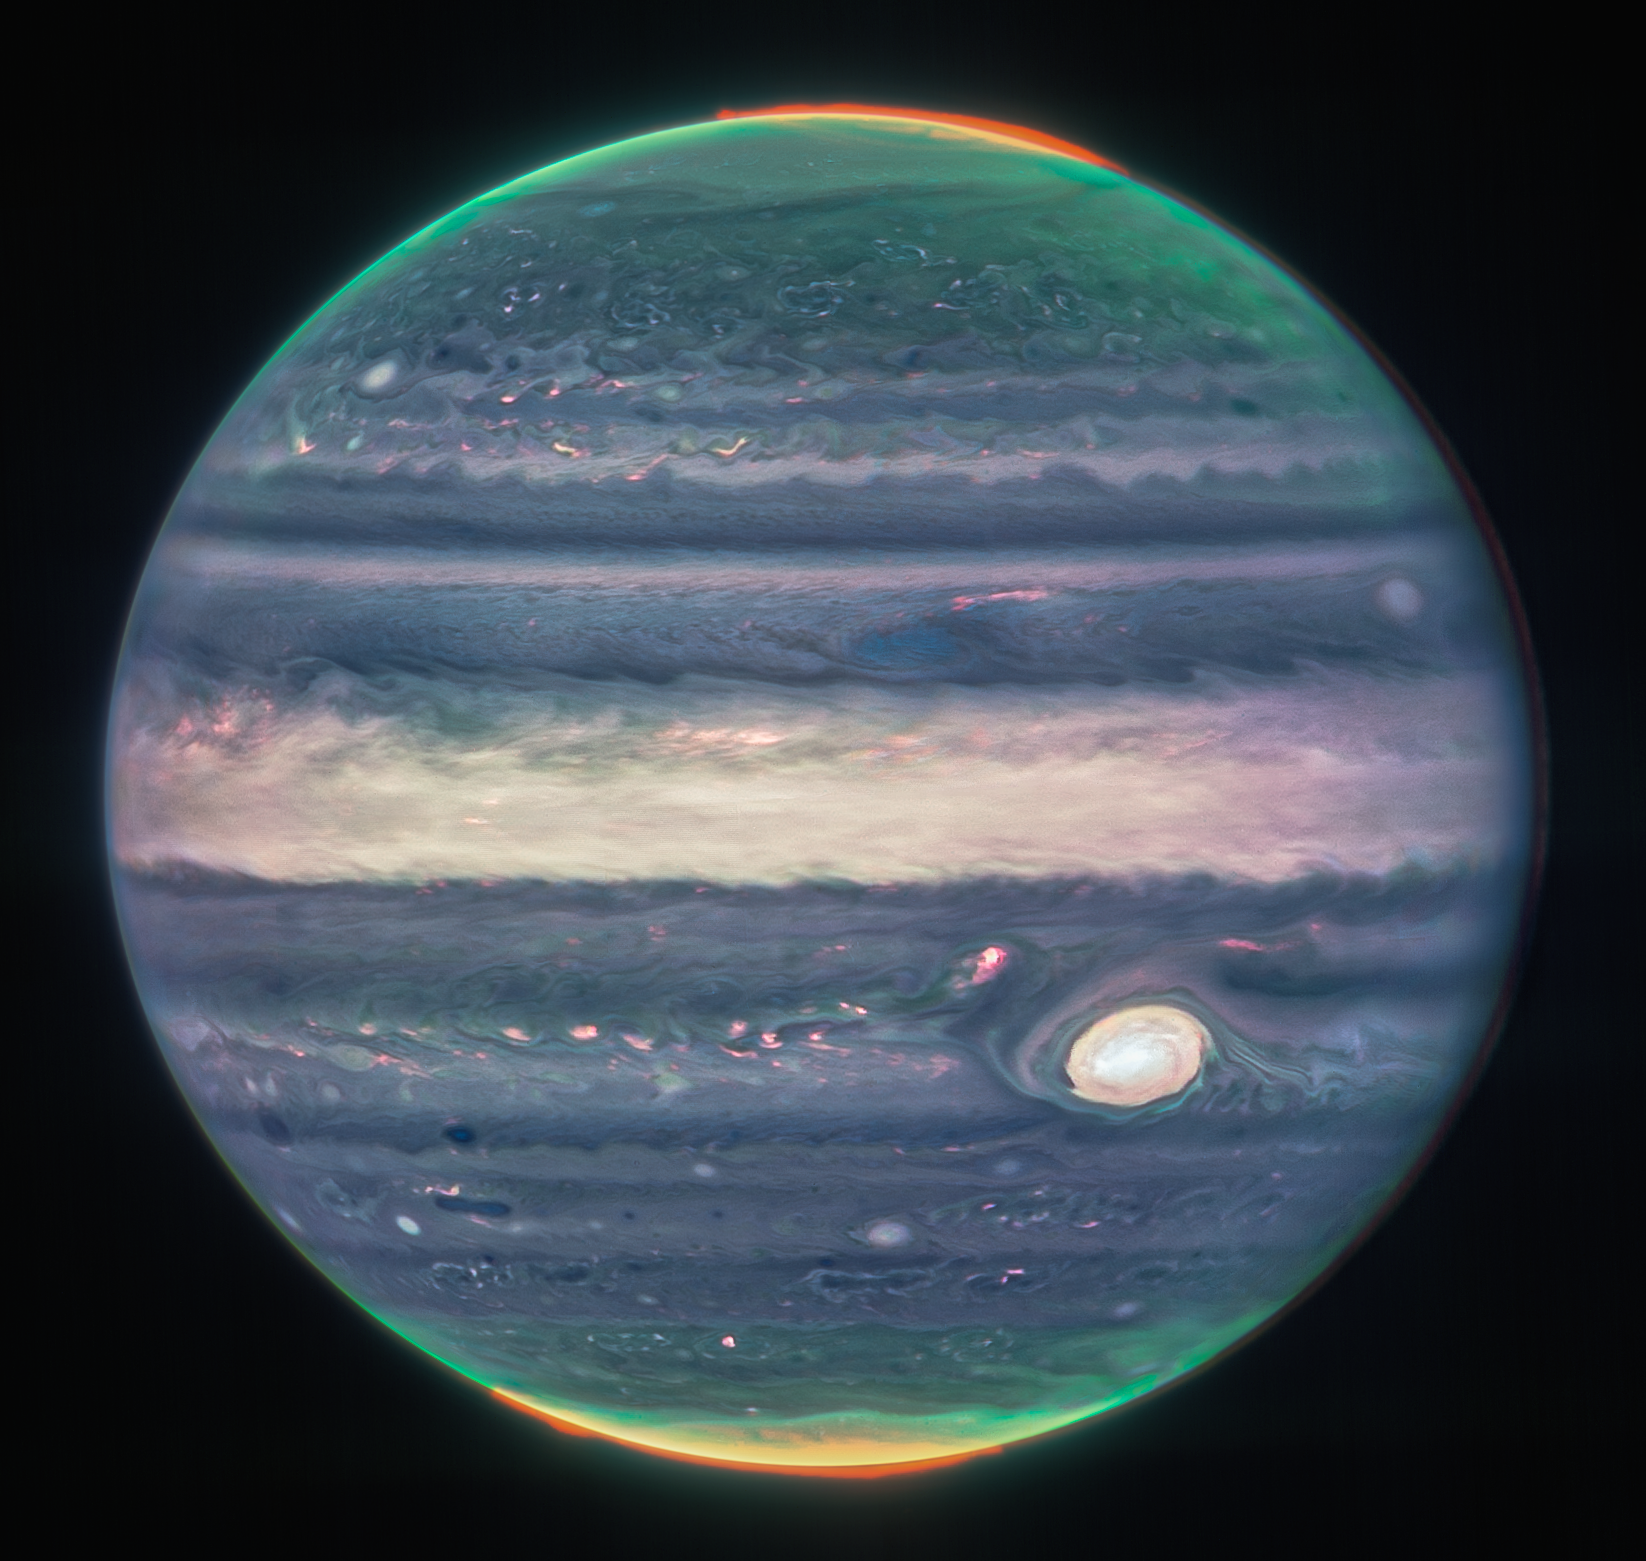 Earth's Sub-Freezing Regions Could Become a Paradise if Jupiter's Orbit Shifts